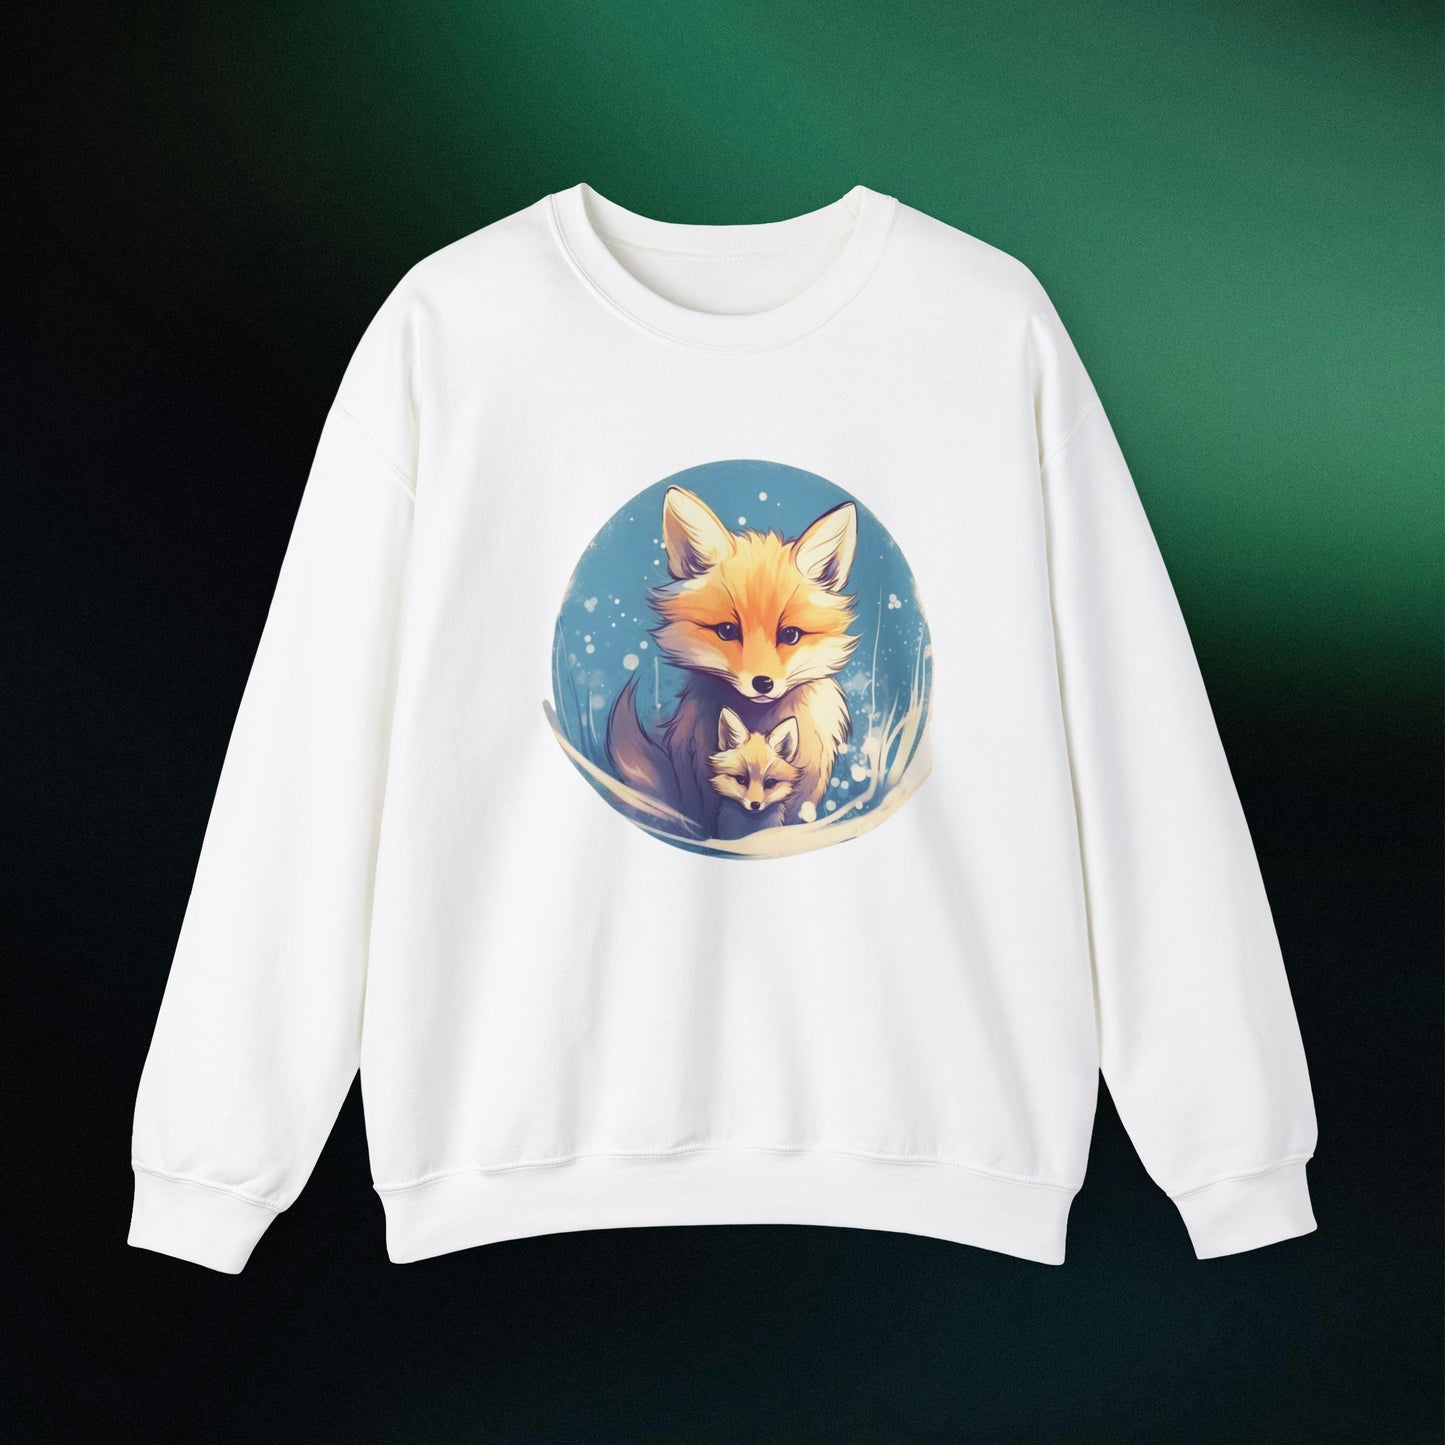 Vintage Forest Witch Aesthetic Sweatshirt - Cozy Fox Cottagecore Sweater with Mommy and Baby Fox Design Sweatshirt S White 